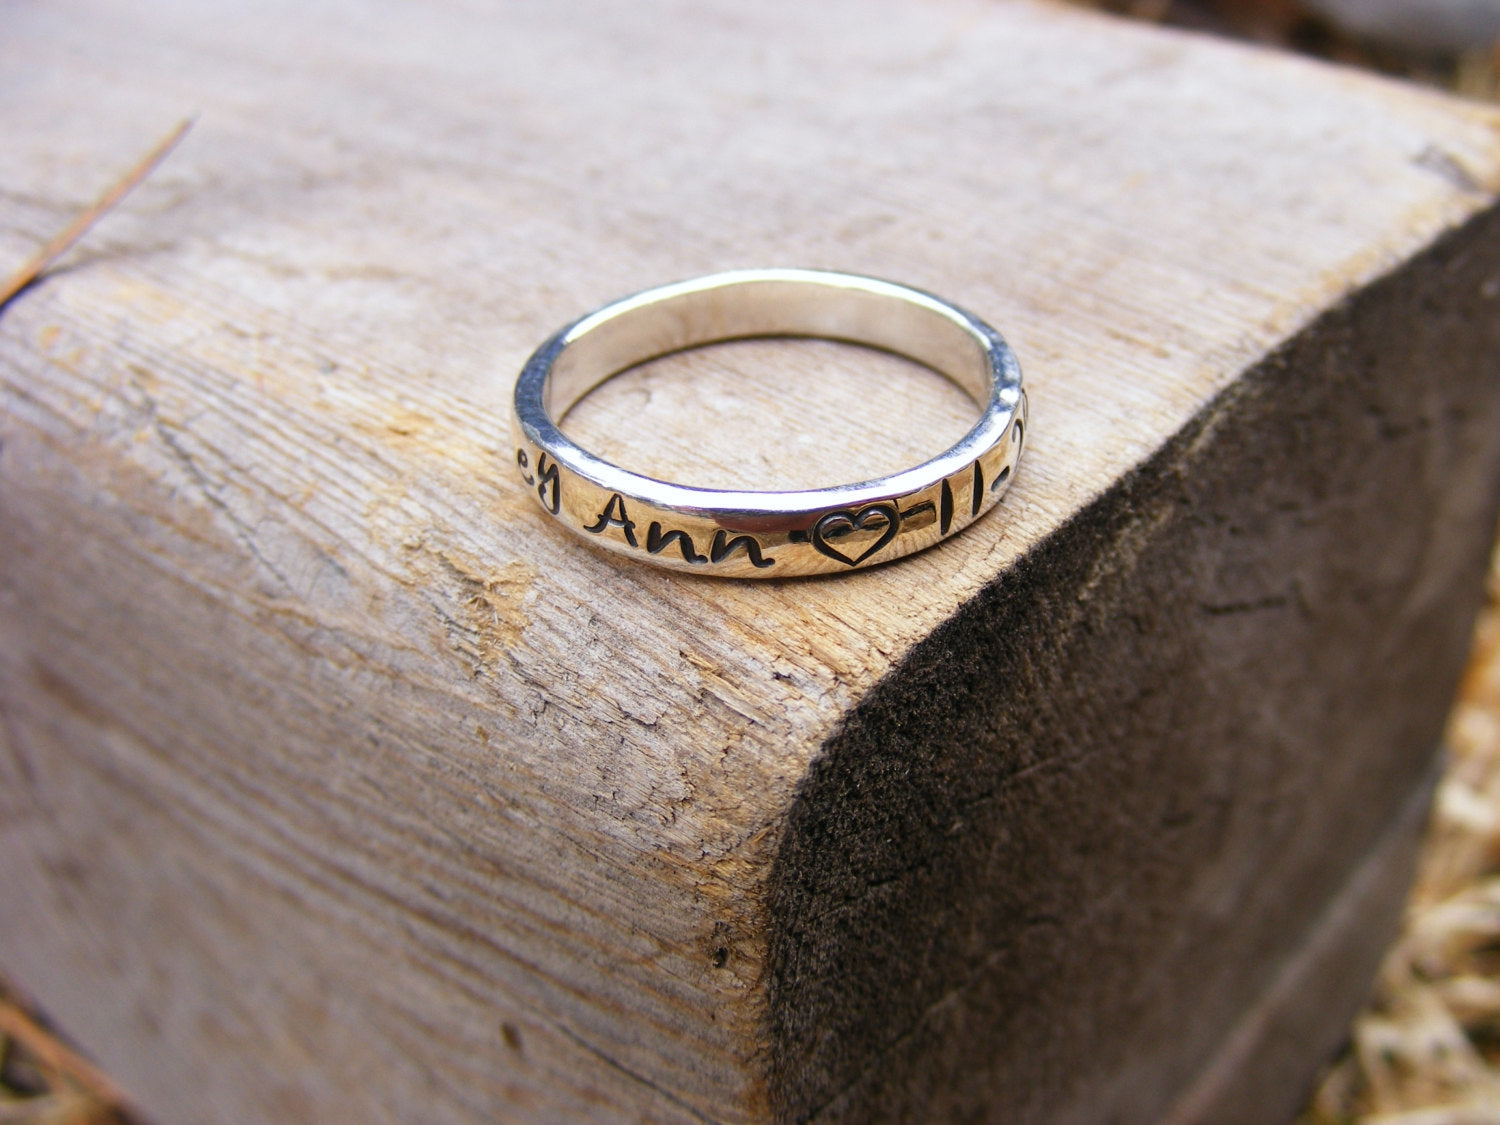 14 Engraving Ideas for Your Engagement Ring